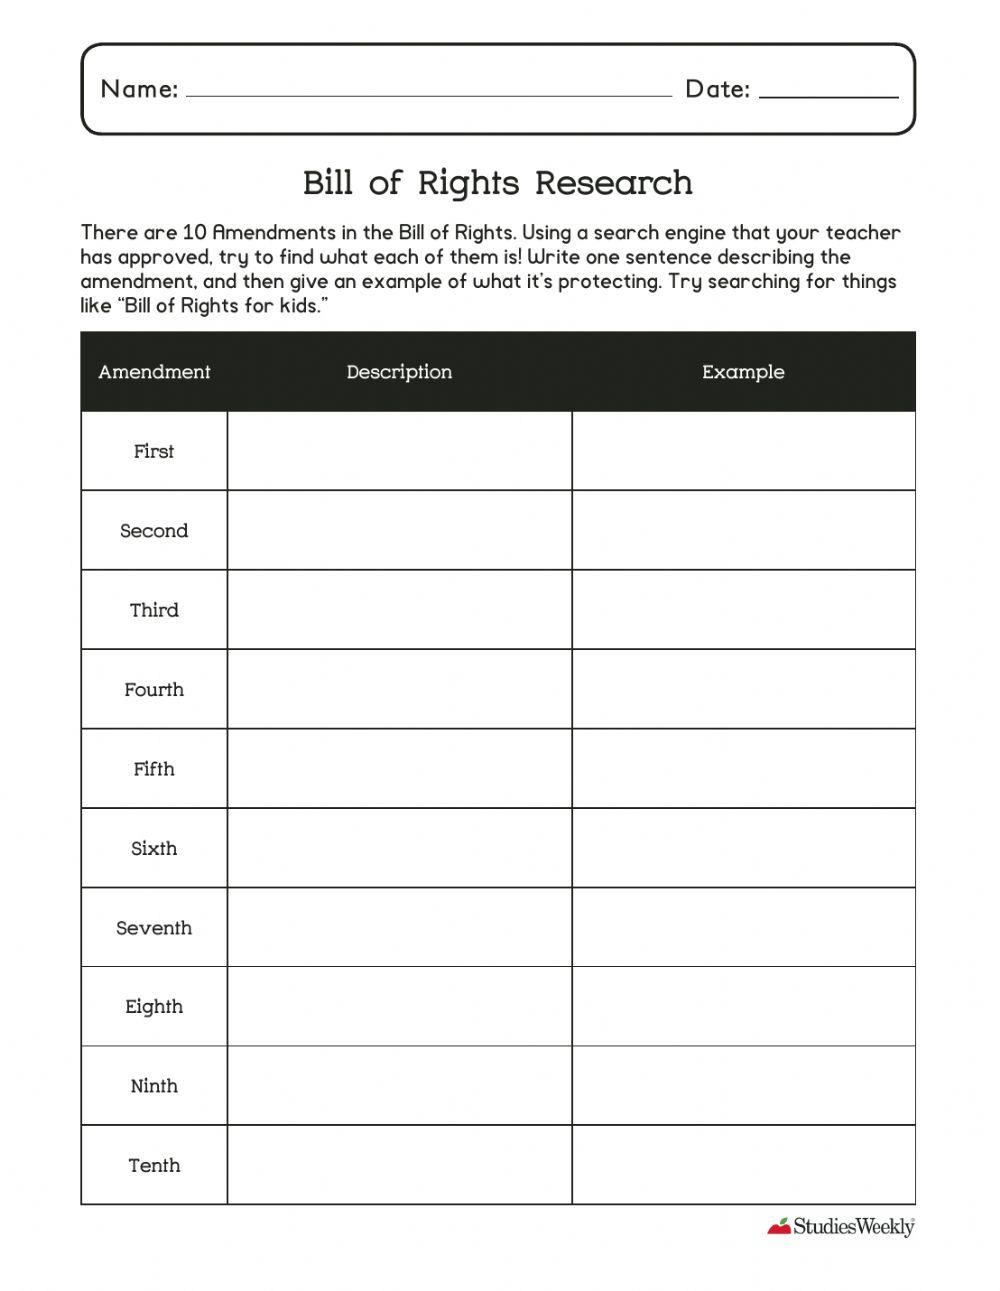 Bill of Rights Research